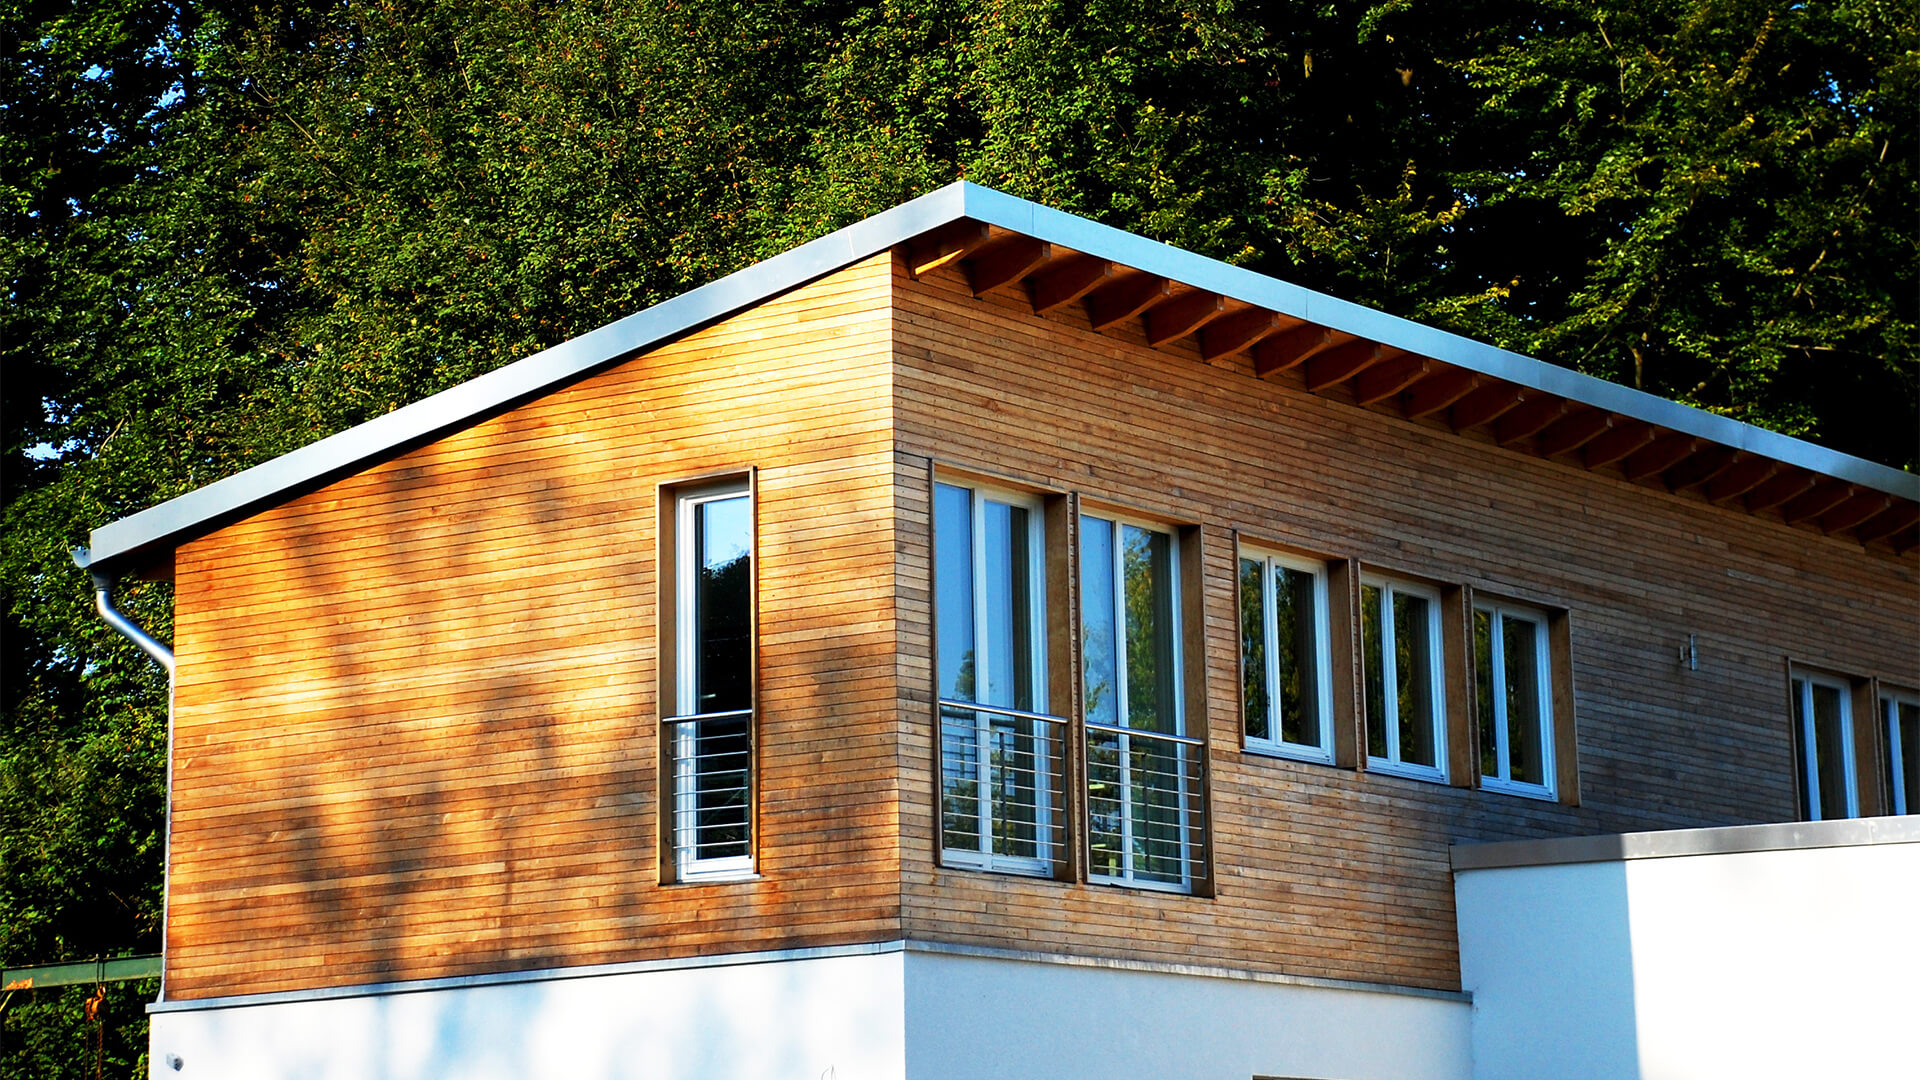 Annex off a house with wooden panneling